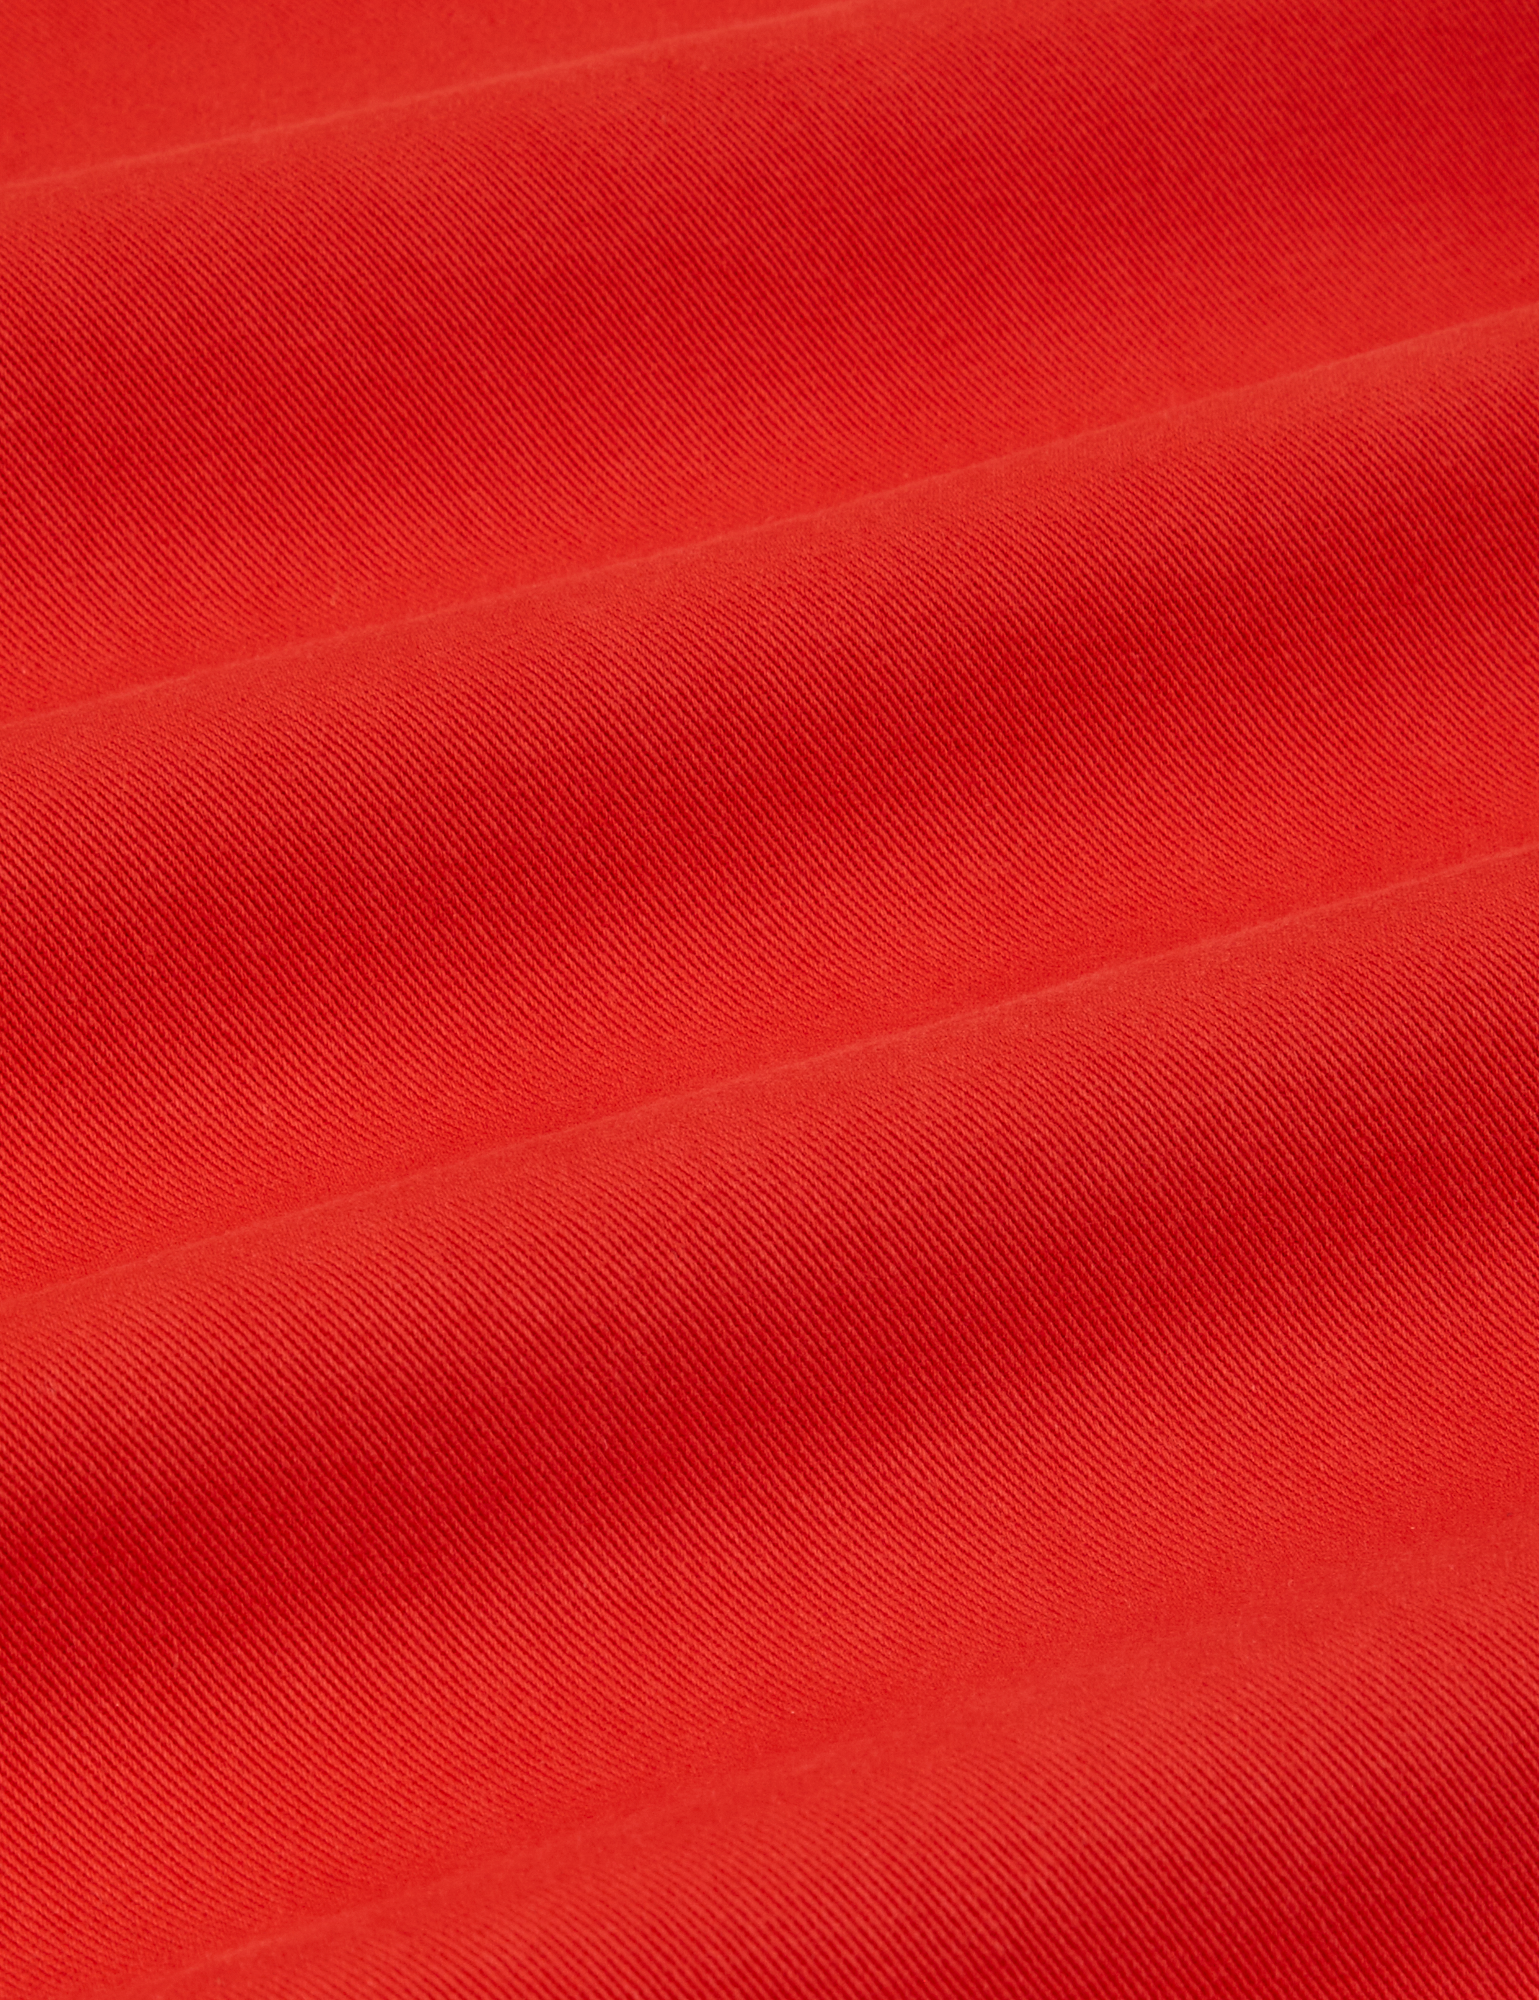 Heavyweight Trousers in Mustang Red fabric detail close up